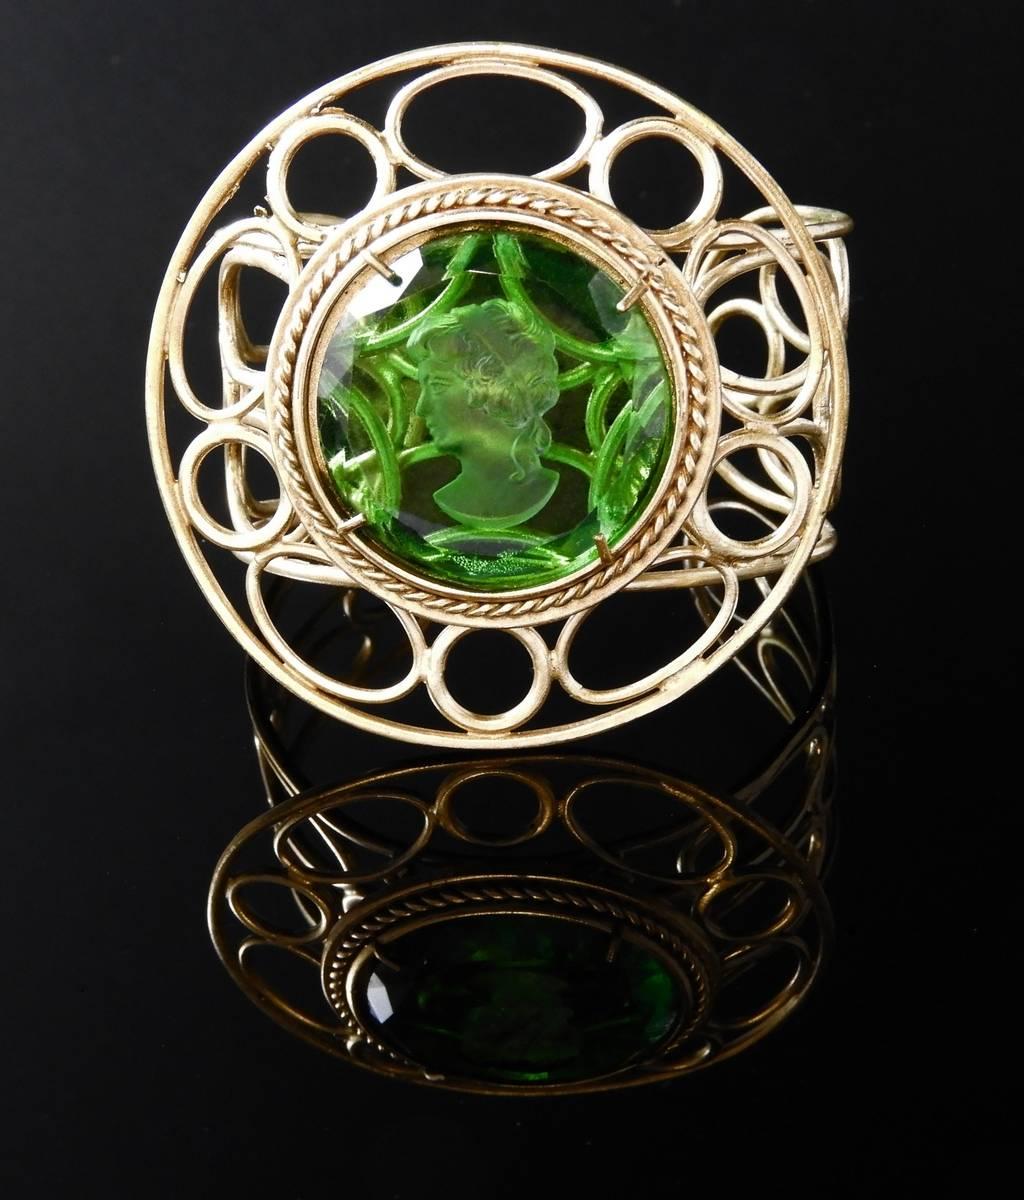 Bronze bracelet with a round green coloured Murano Glass piece in the middle. Bracelet  is made in Florence by goldsmith craftman and marked Patrizia Daliana, a famous italian jewelry designer.